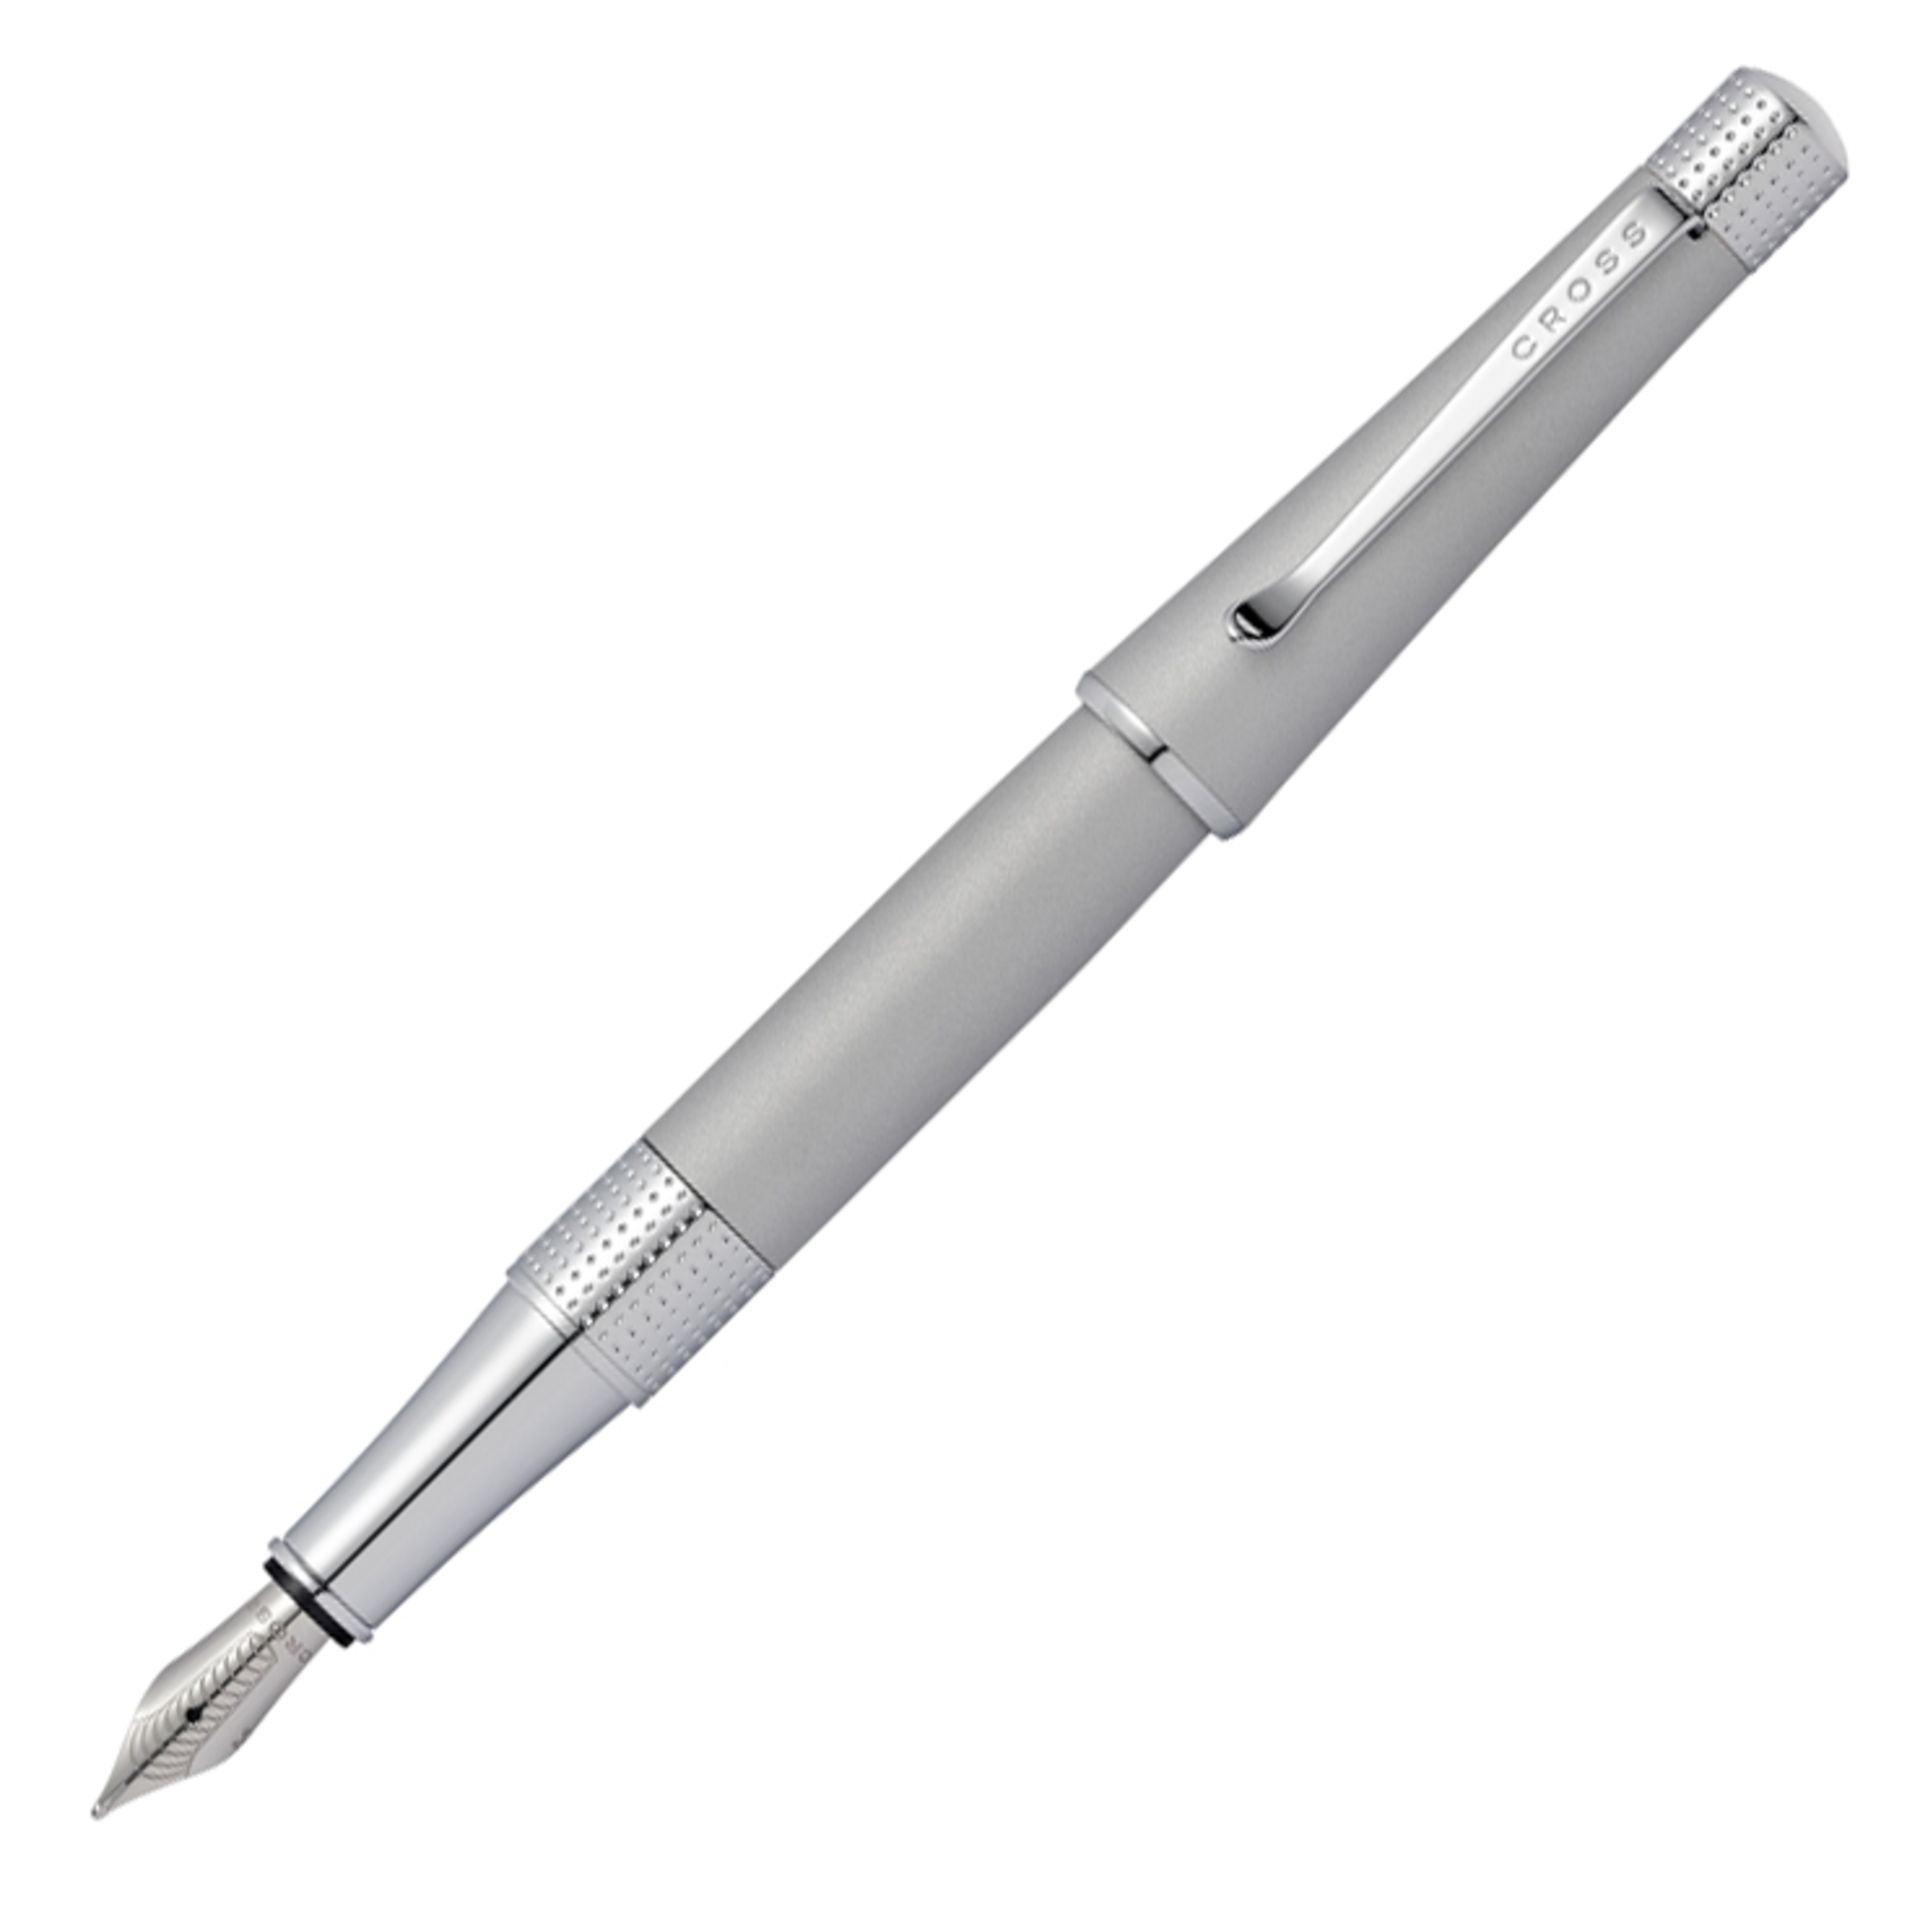 V *TRADE QTY* Brand New Cross Beverly Satin Chrome Fountain Pen - Fitted with a medium Stainless